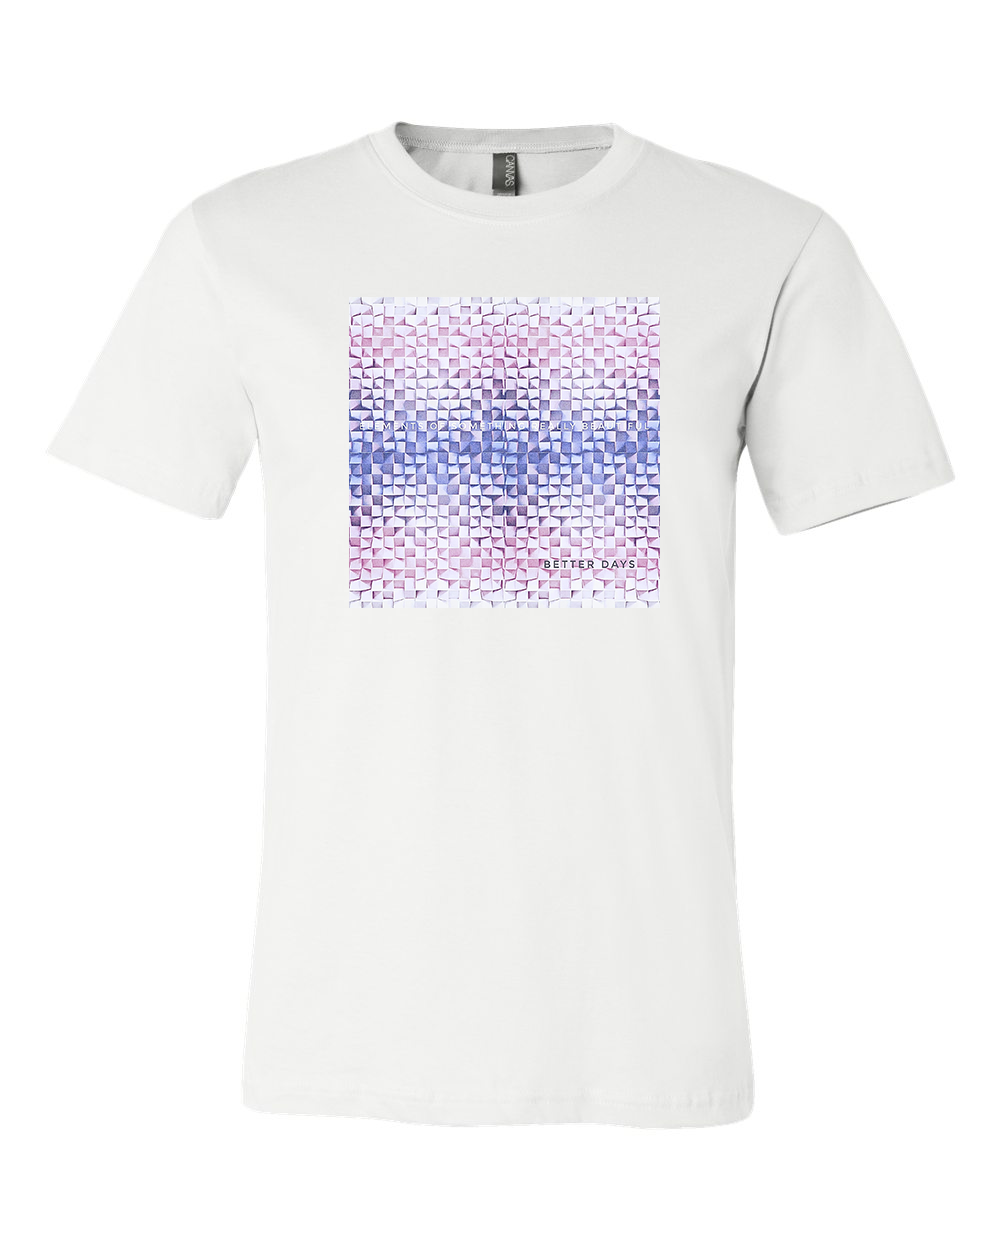 Elements of Something Really Beautiful : Better Days Tee